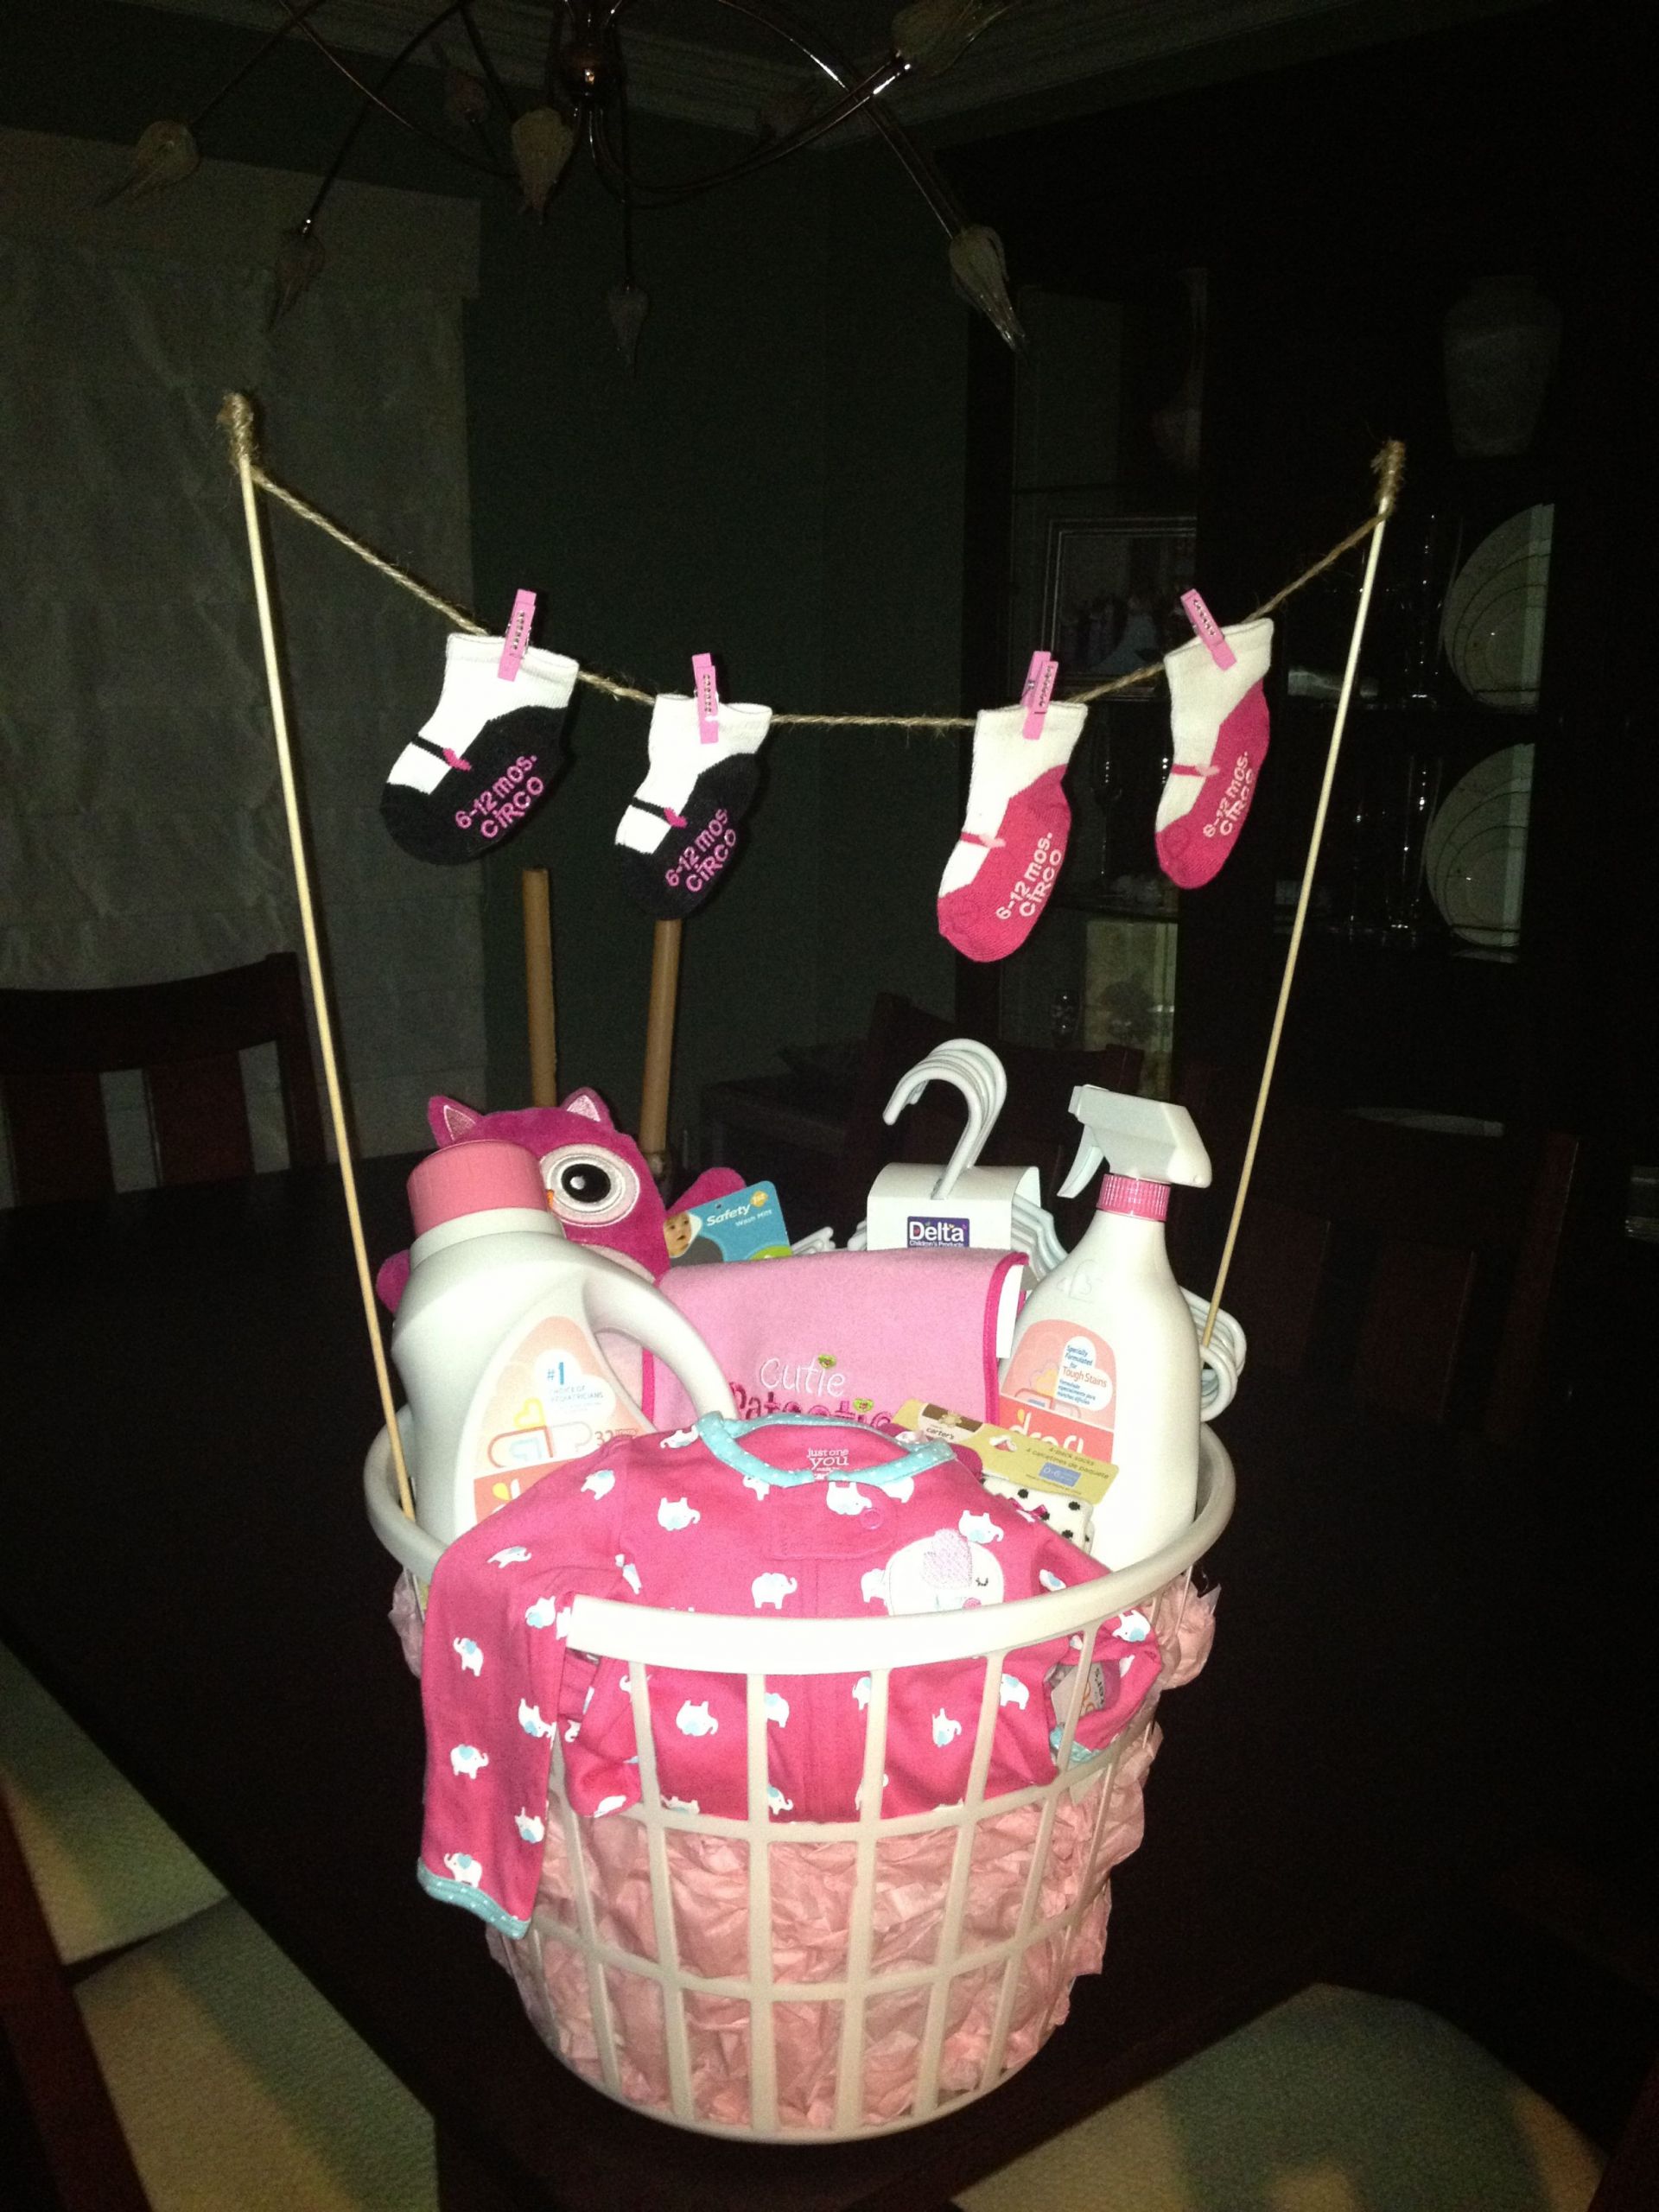 Crafty Baby Shower Gift Ideas
 Laundry basket baby shower t Baby Gifts